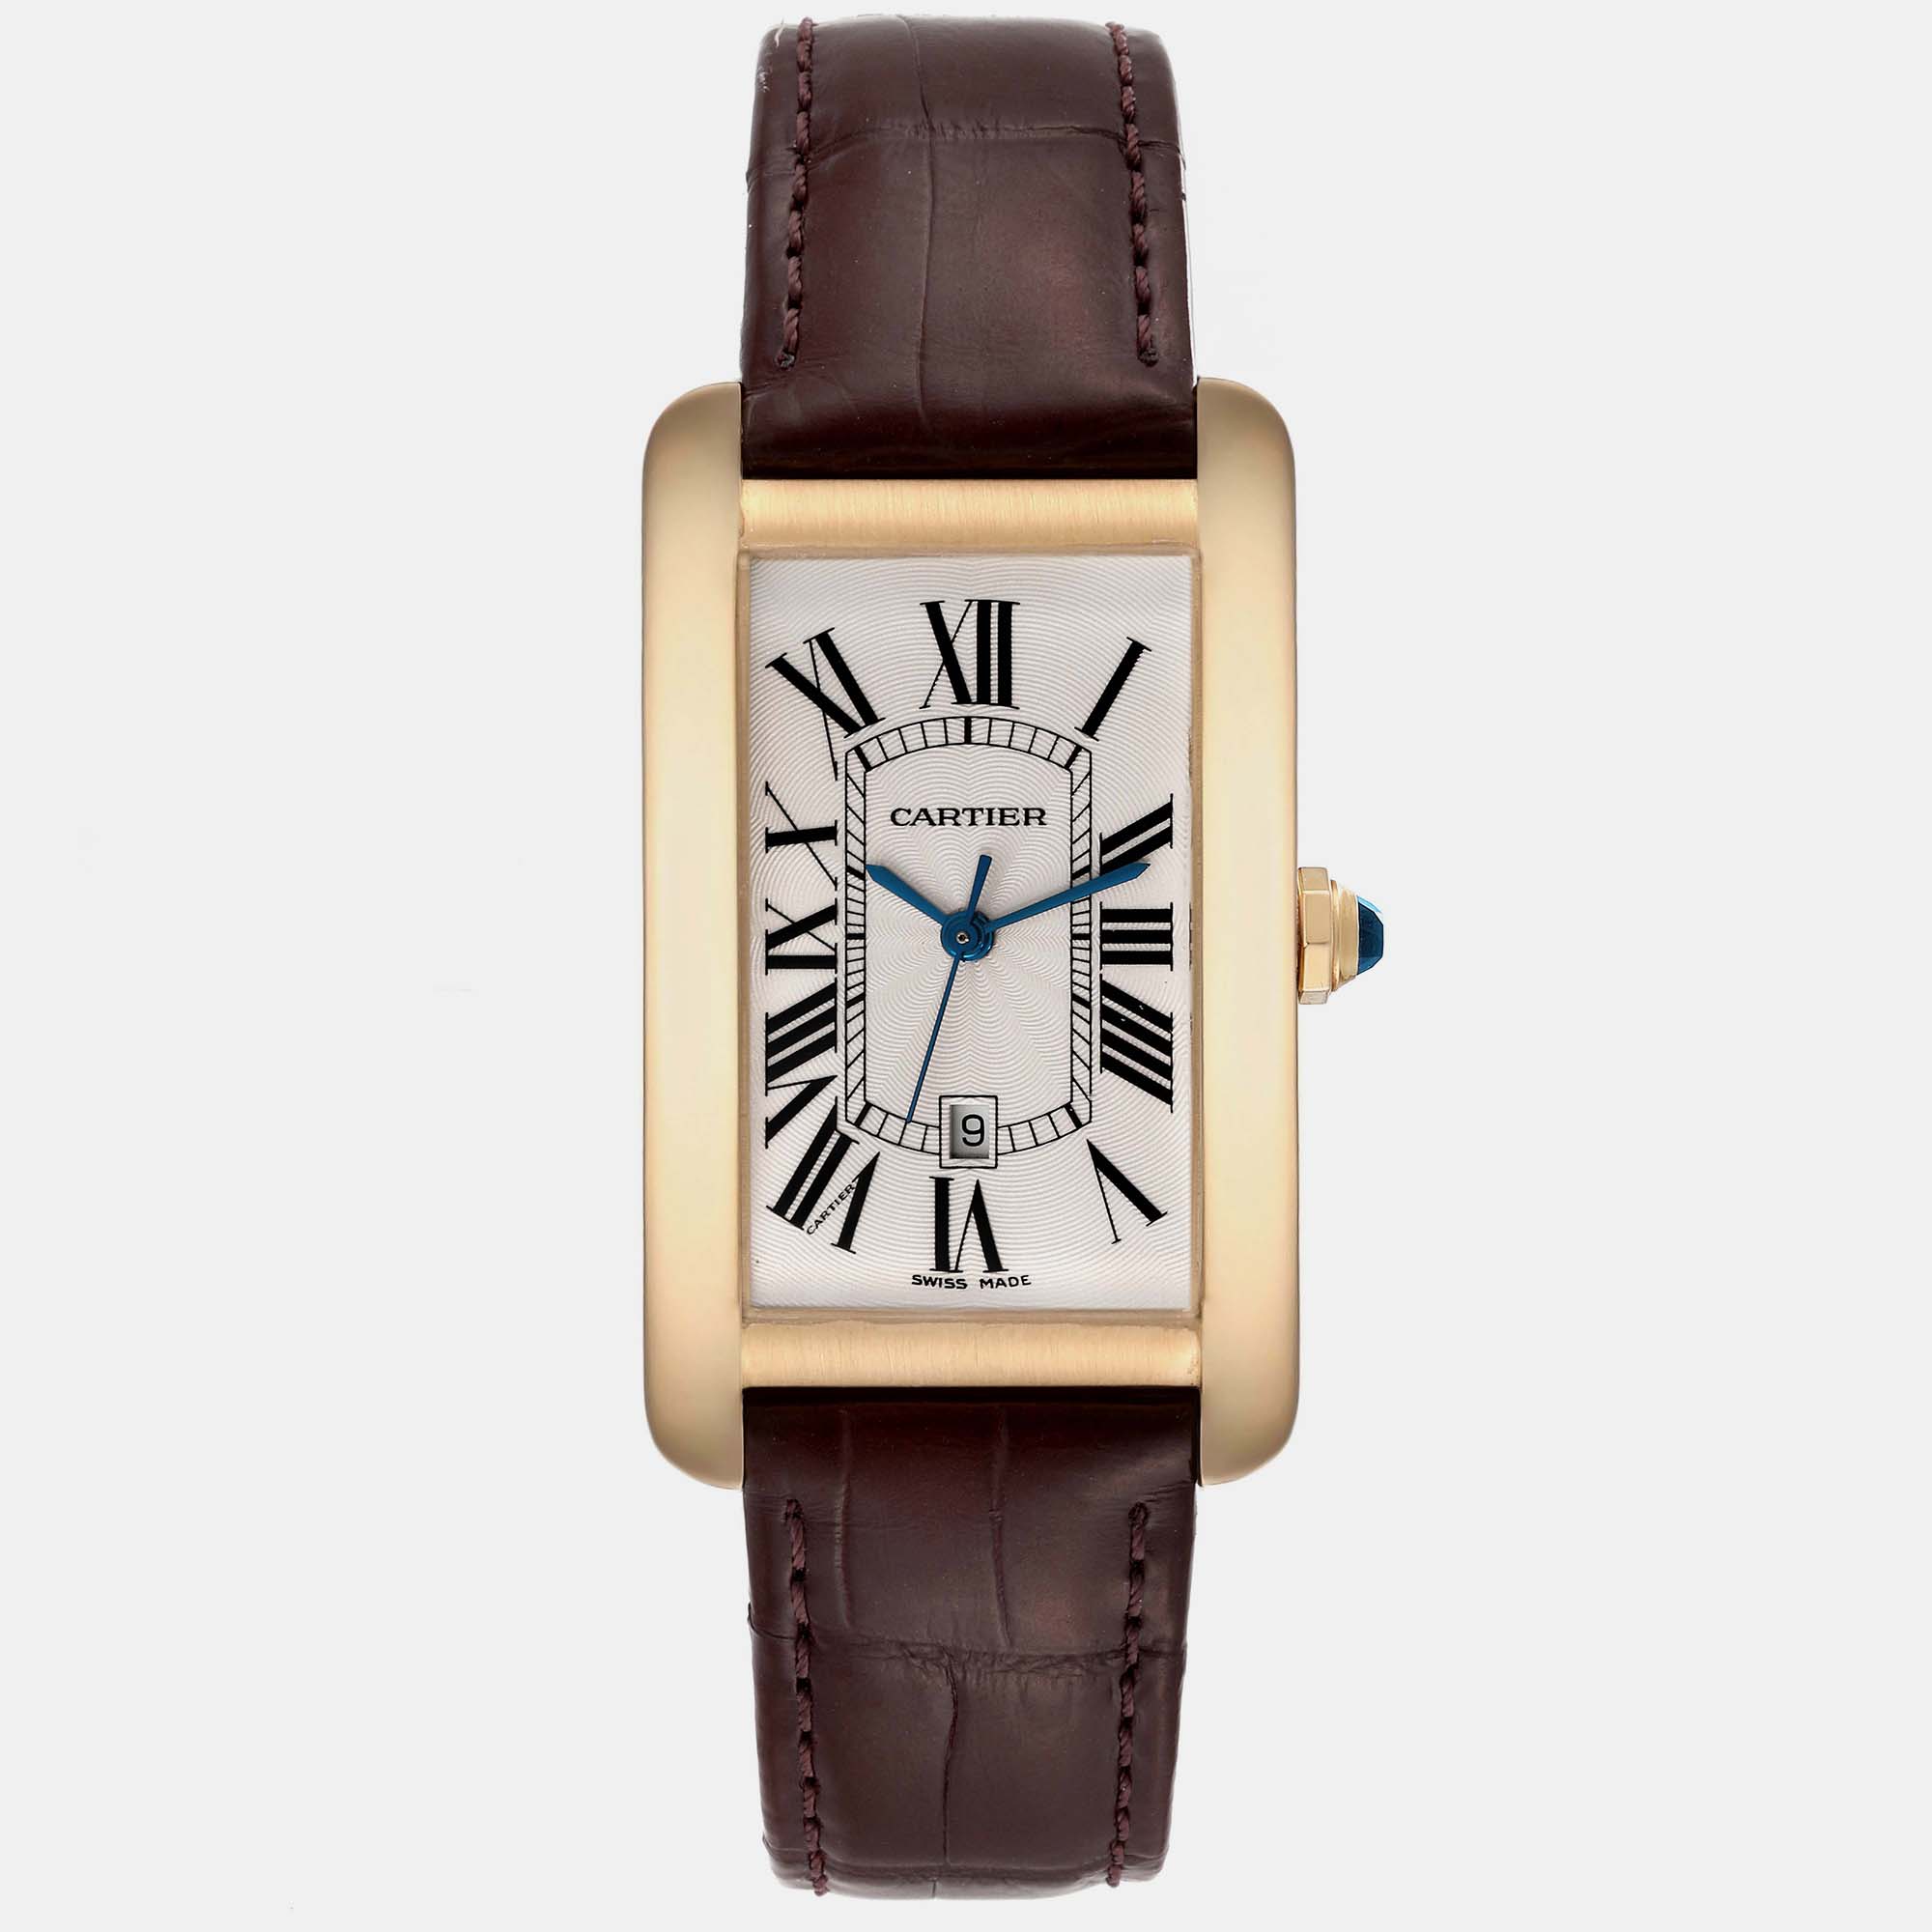 Cartier Tank Americaine Yellow Gold Automatic Mens Watch W2603156 26.6 Mm X 45.1 Mm